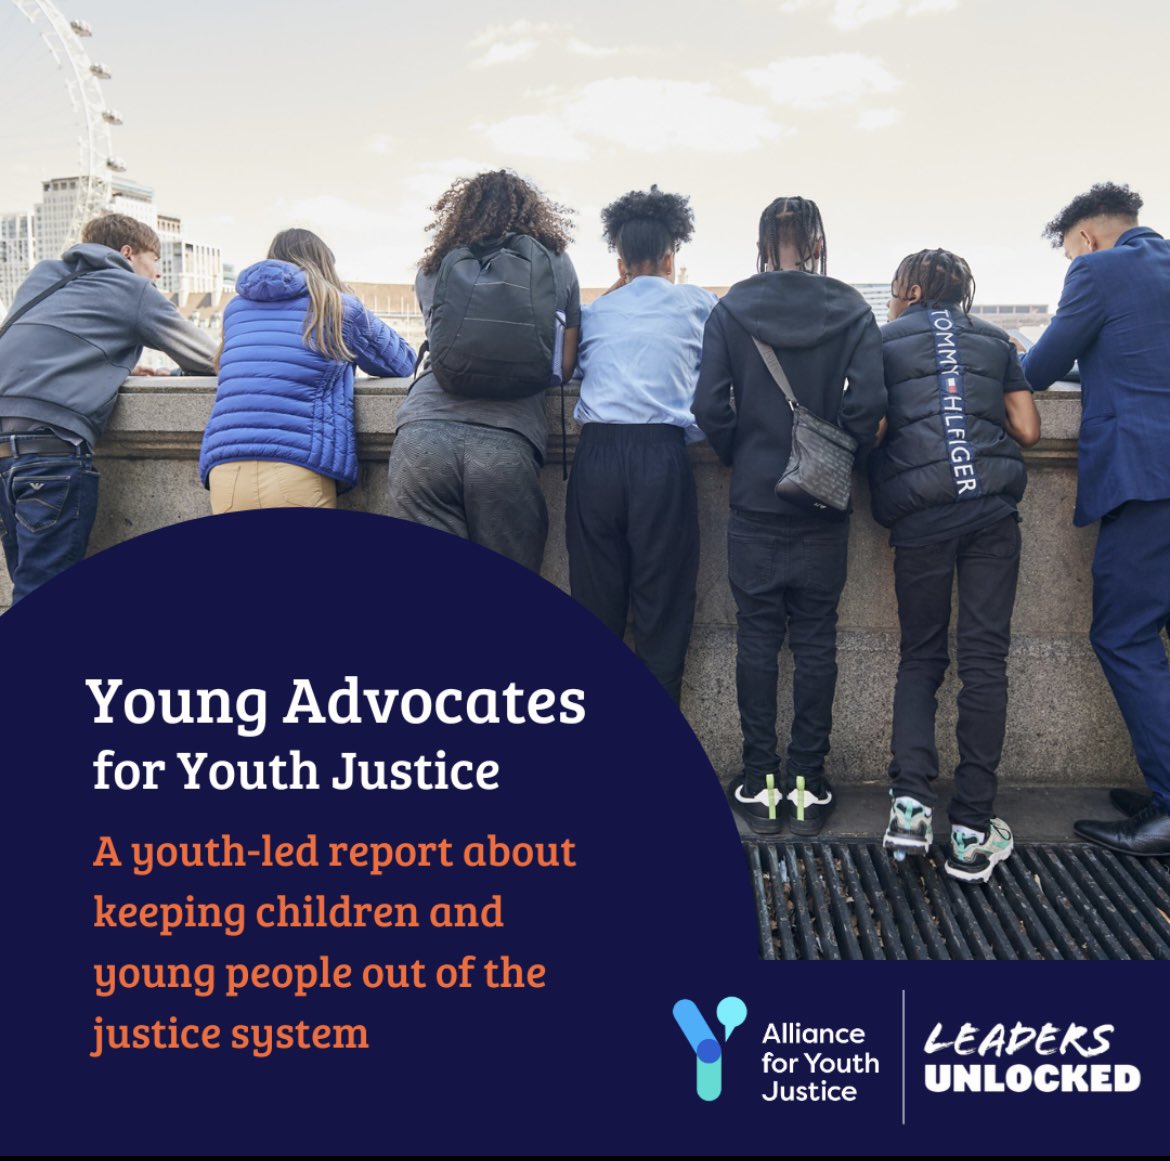 Today the Young Advocates, supported by @the_AYJ @LeadersUnlocked, publish their latest report!   They present findings from peer-to-peer engagement with 90 children & young people, & recommendations to improve the justice system.   Read the report here: bit.ly/YA-2024